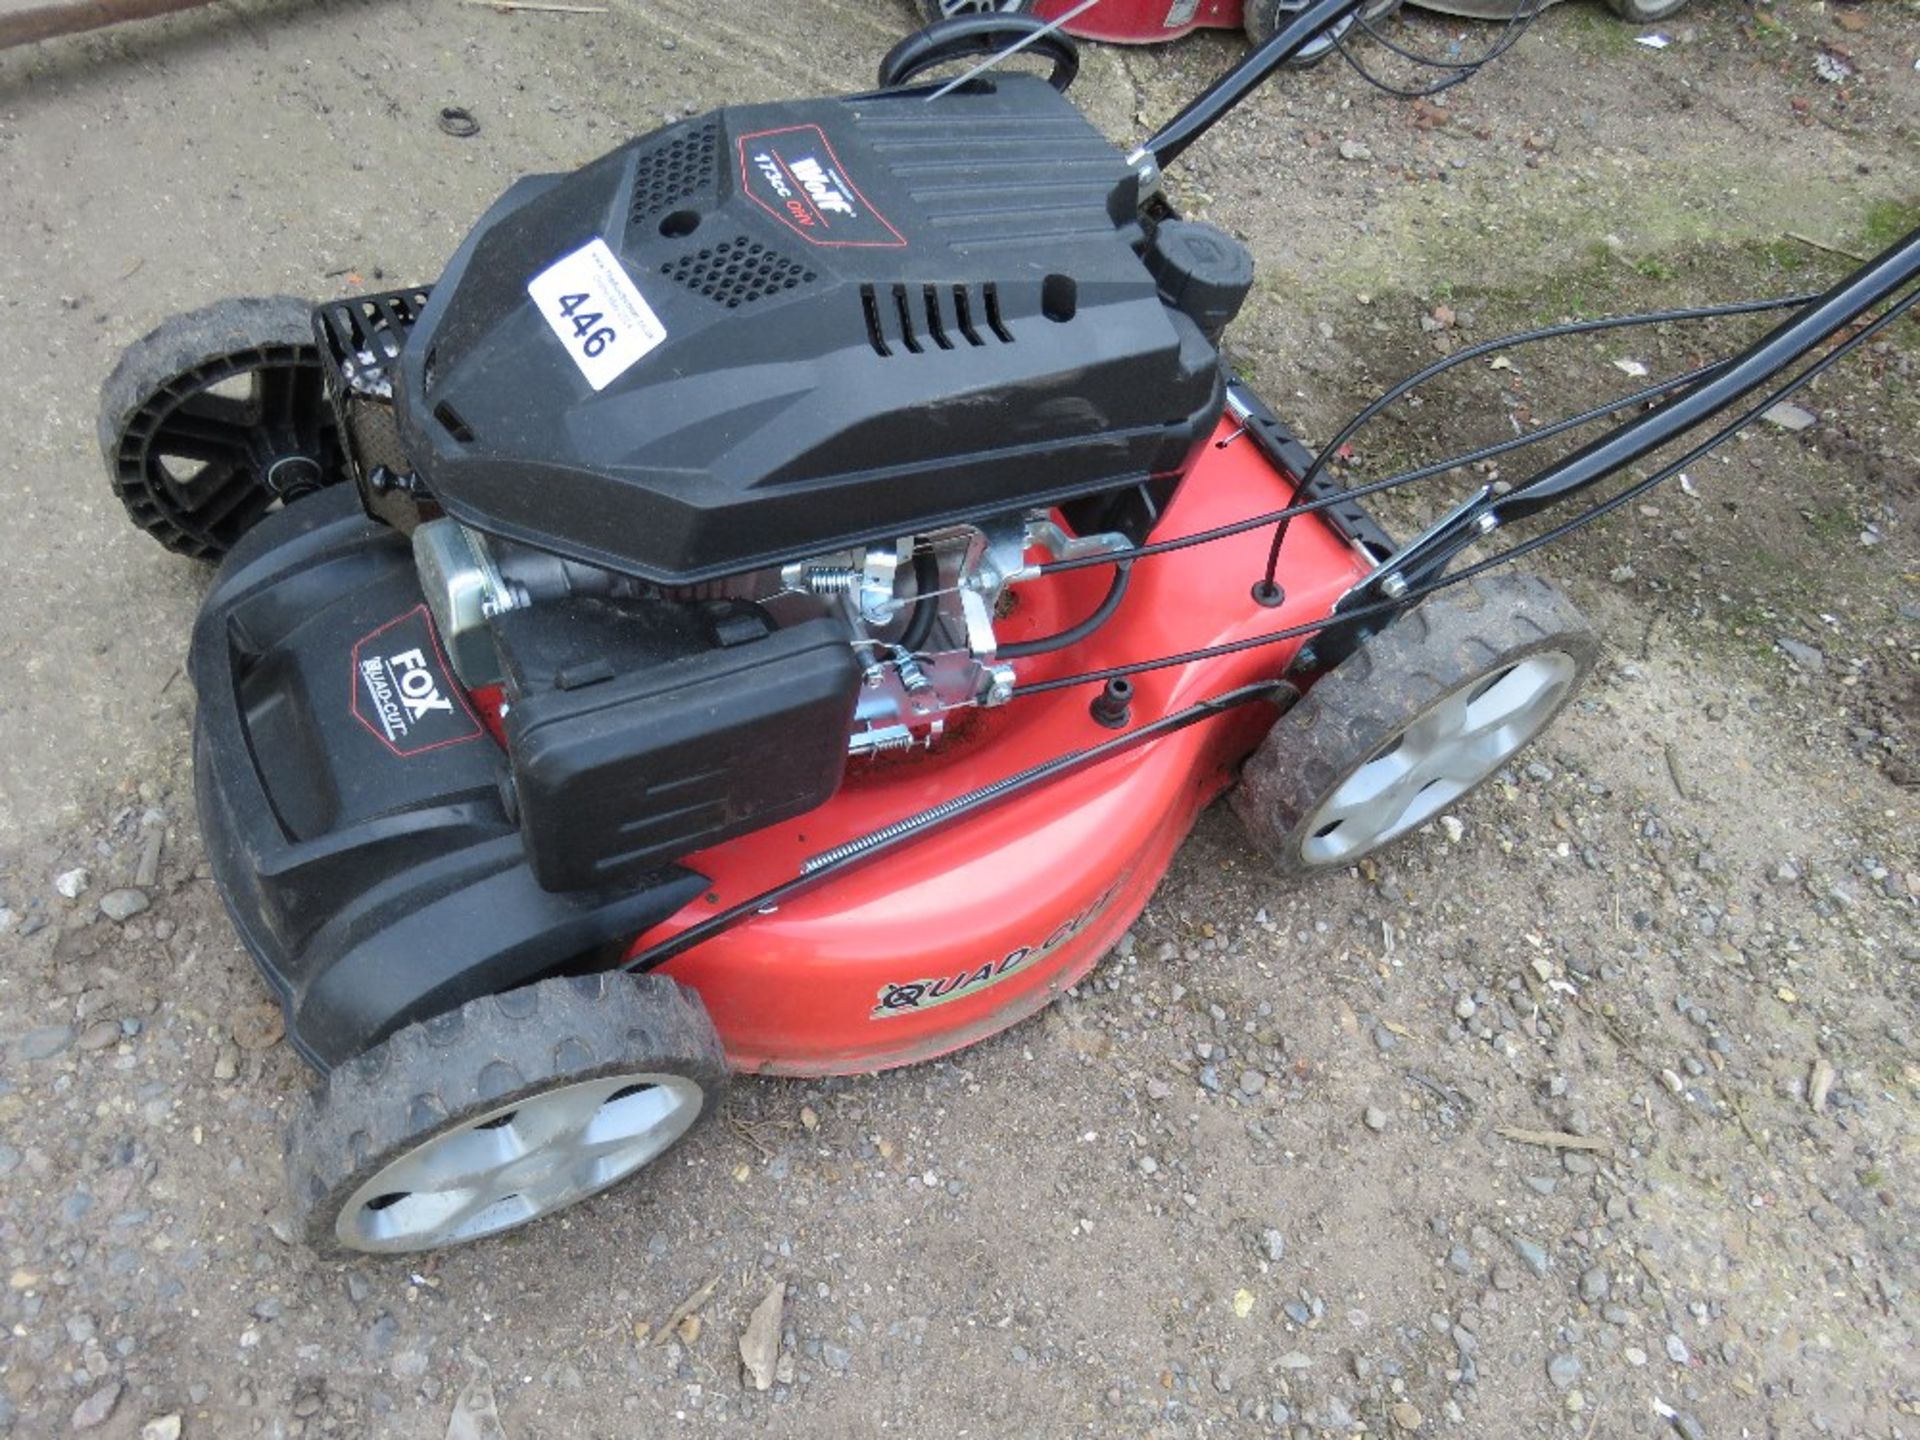 FOX QUAD CUT PETROL ENGINED MOWER WITH NO COLLECTOR. ....THIS LOT IS SOLD UNDER THE AUCTIONEERS MARG - Image 2 of 4